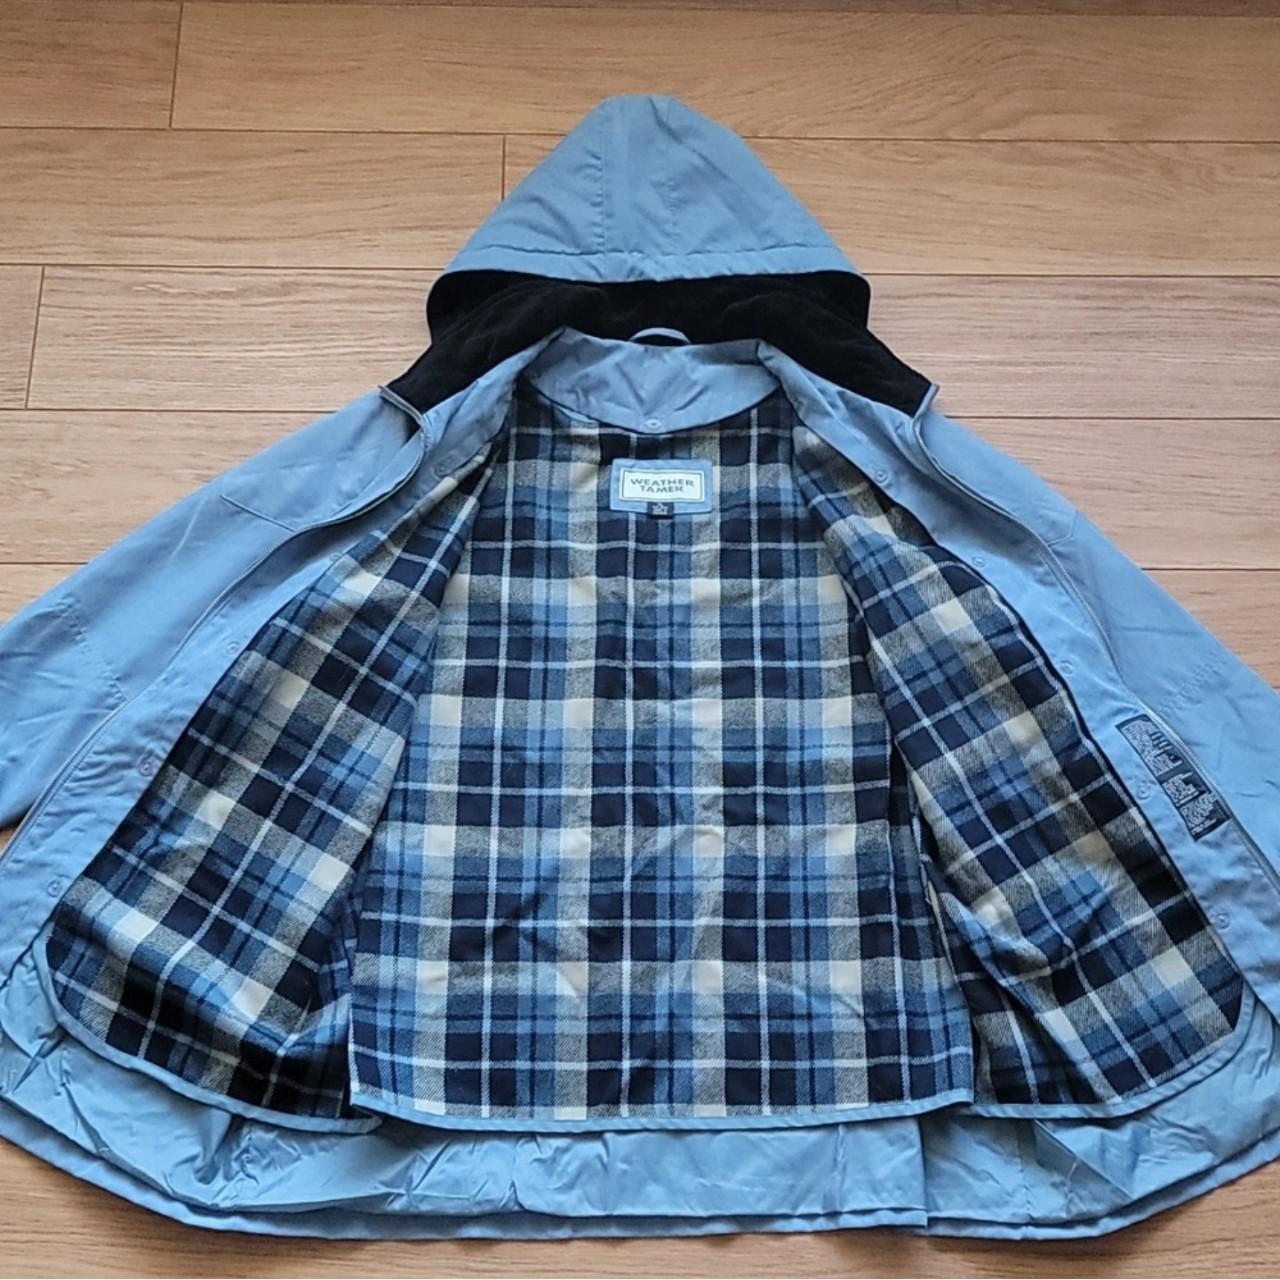 Product Image 2 - Vintage 1990s Blue Coat with